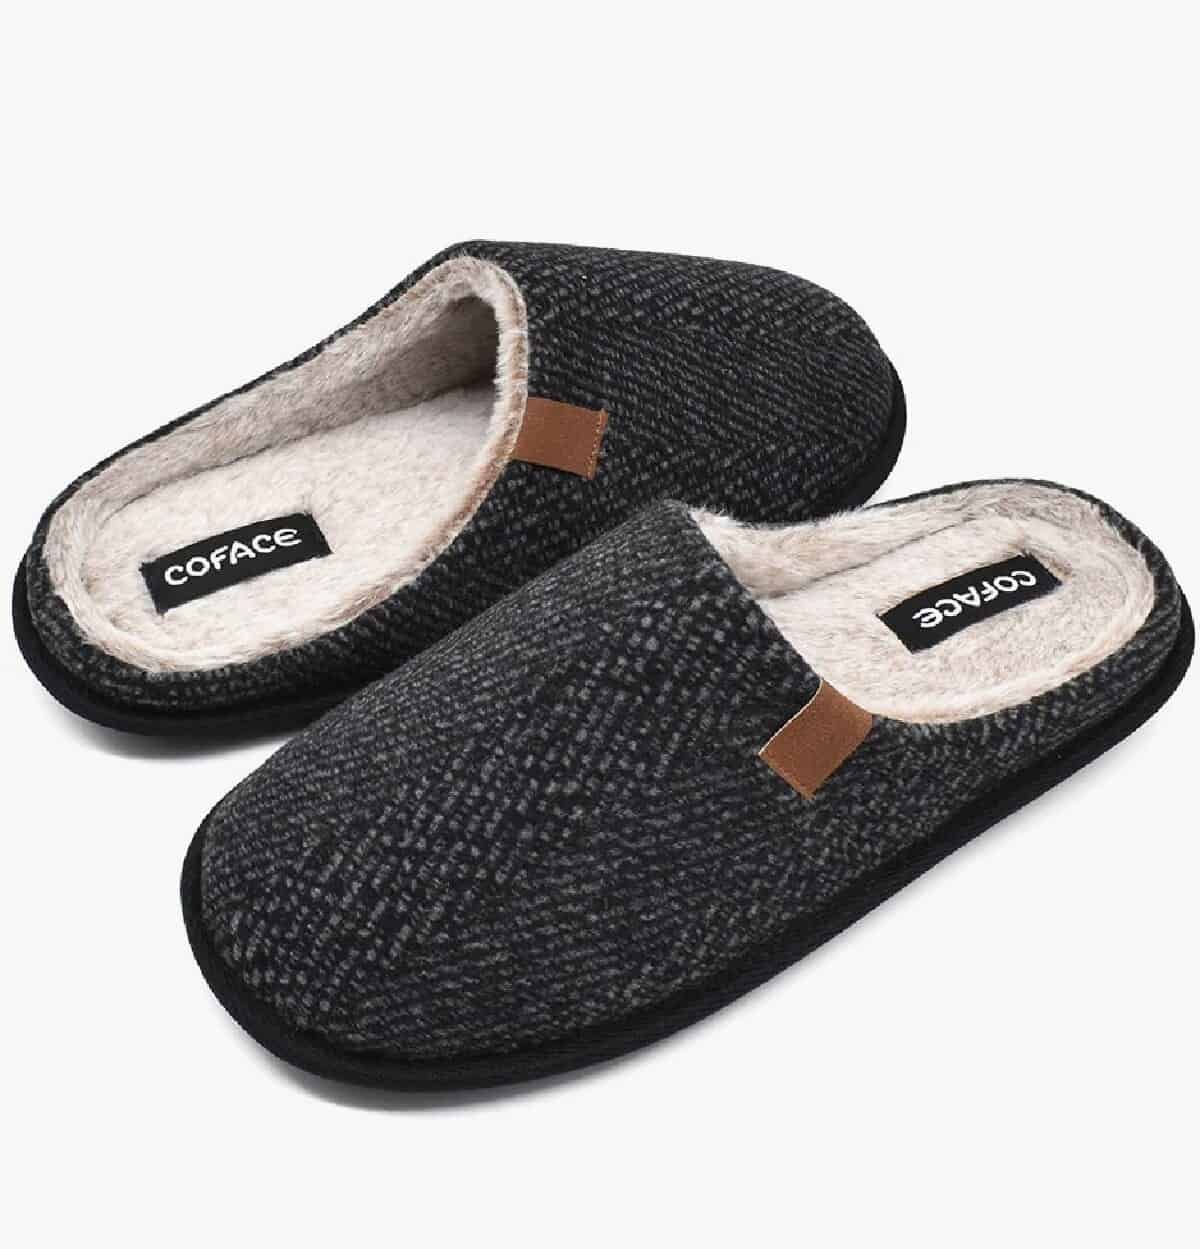 A pair of black twill memory foam slippers with tops opposite each other.